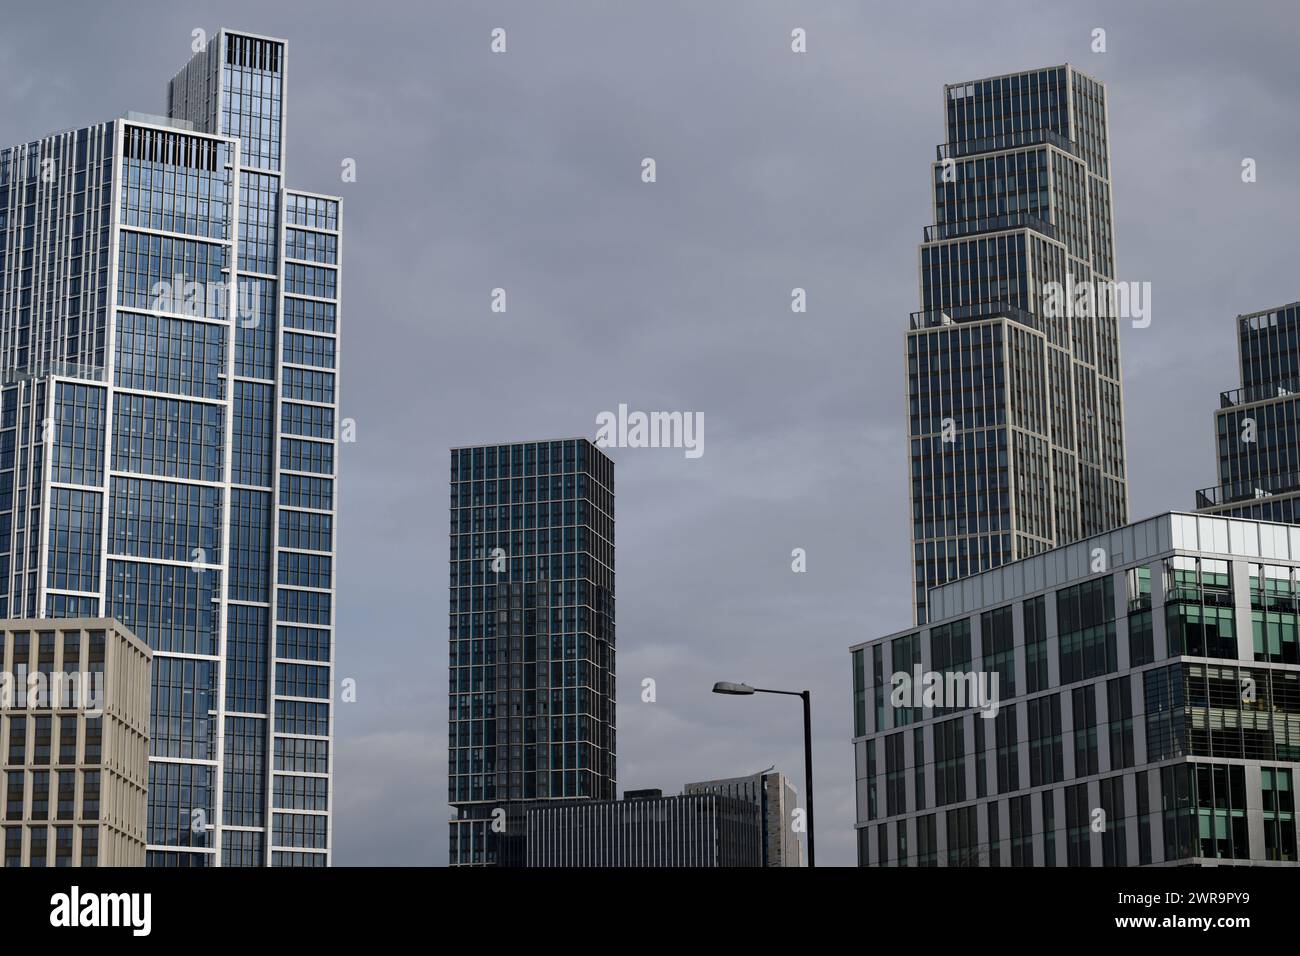 New tower blocks in the Nine Elms area of south London. The skyscrapers are part of a larger Battersea and Nine Elms redevelopment project. The area b Stock Photo